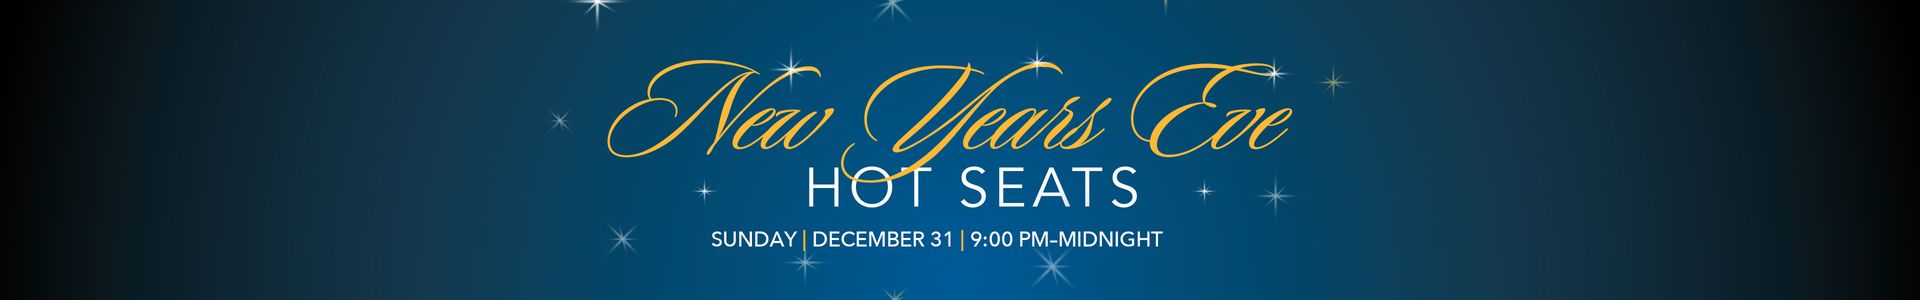 New Year's Eve Hot Seats